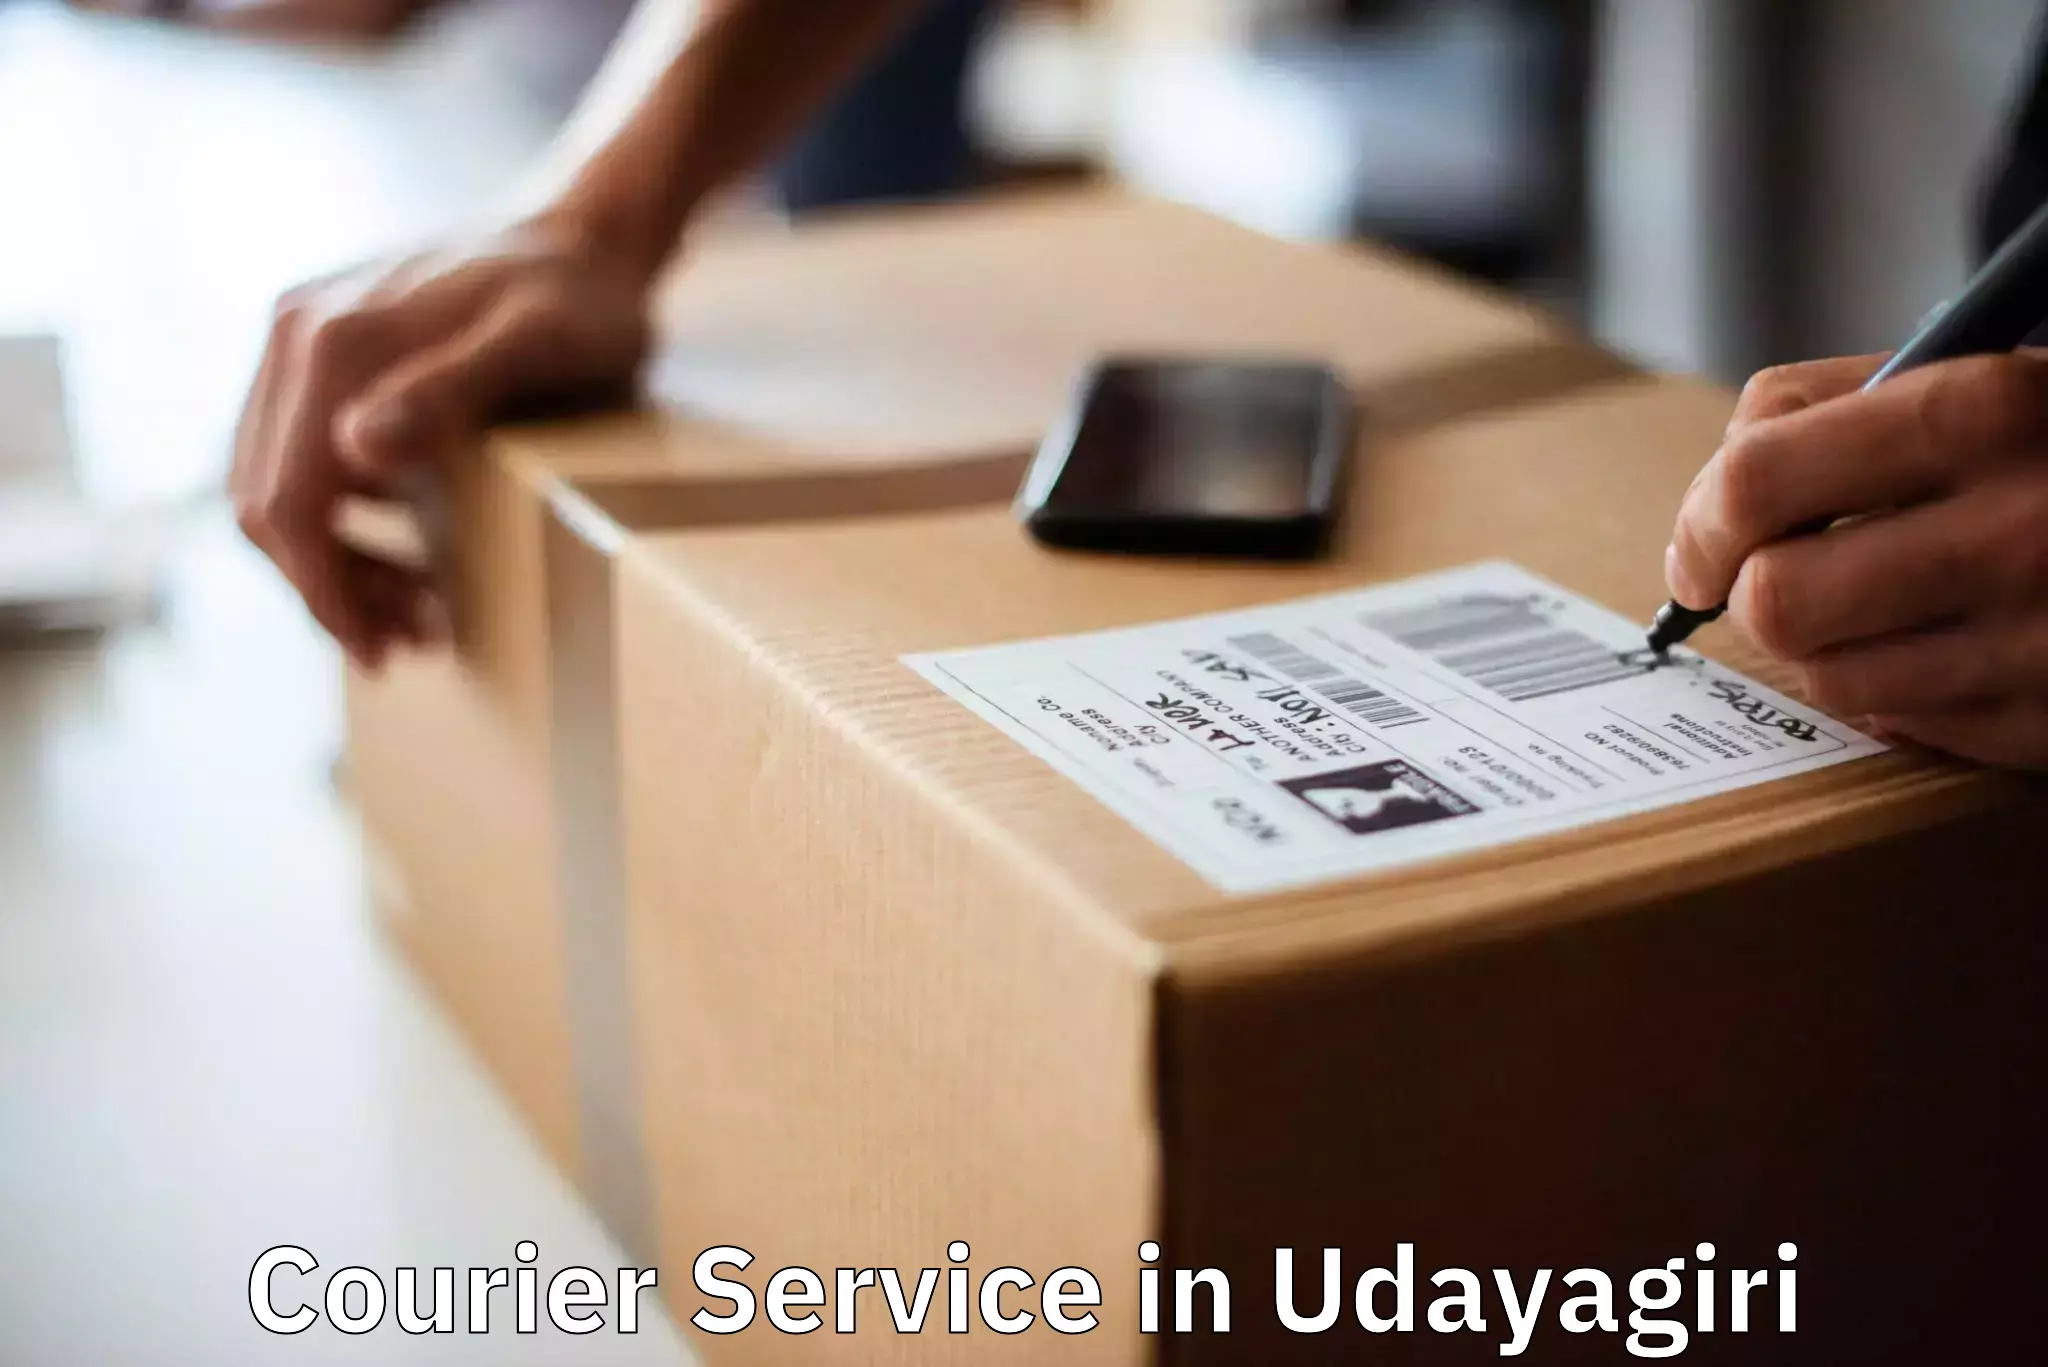 User-friendly delivery service in Udayagiri